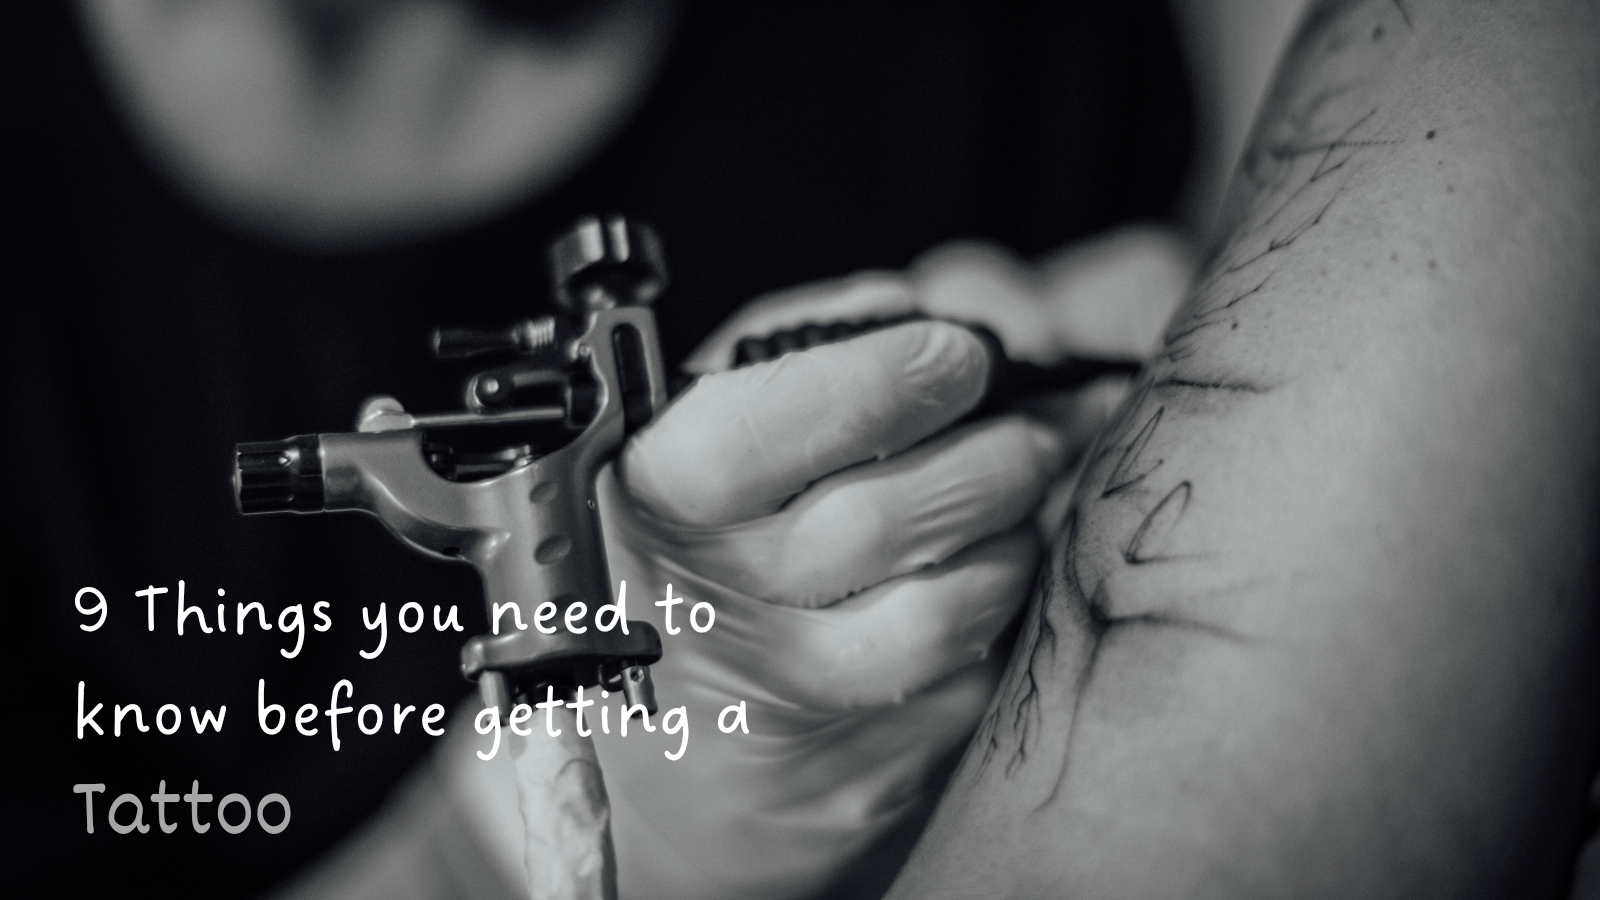 9 Things you need to know before getting a Tattoo